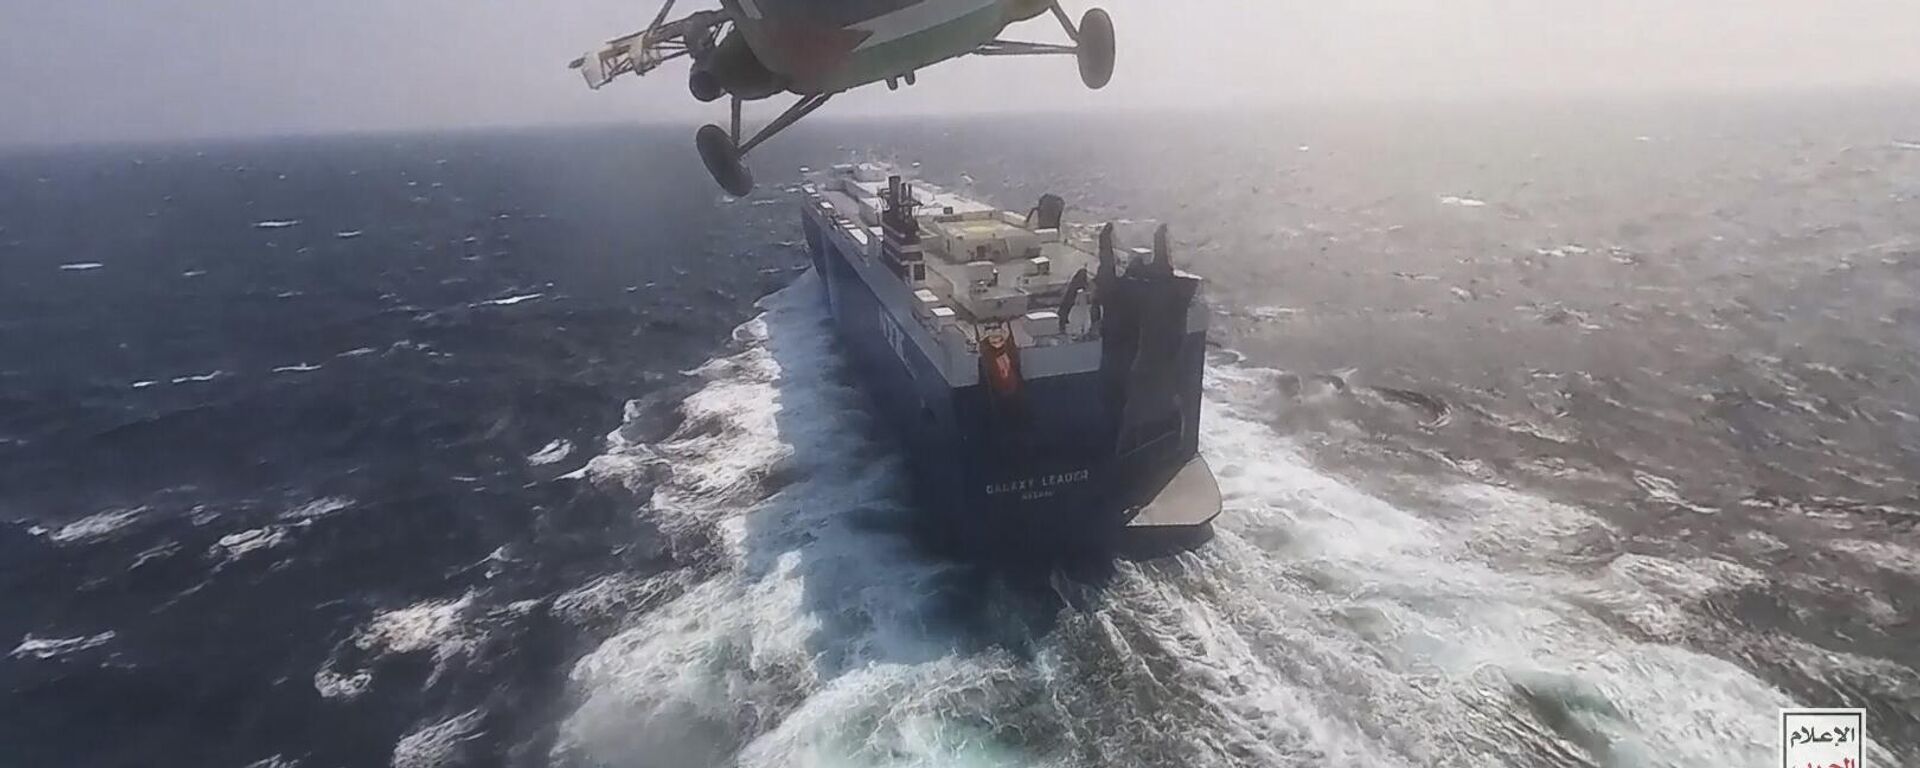 This photo released by the Houthi Media Center shows a Houthi forces helicopter approaching the cargo ship Galaxy Leader  - Sputnik Africa, 1920, 10.12.2023